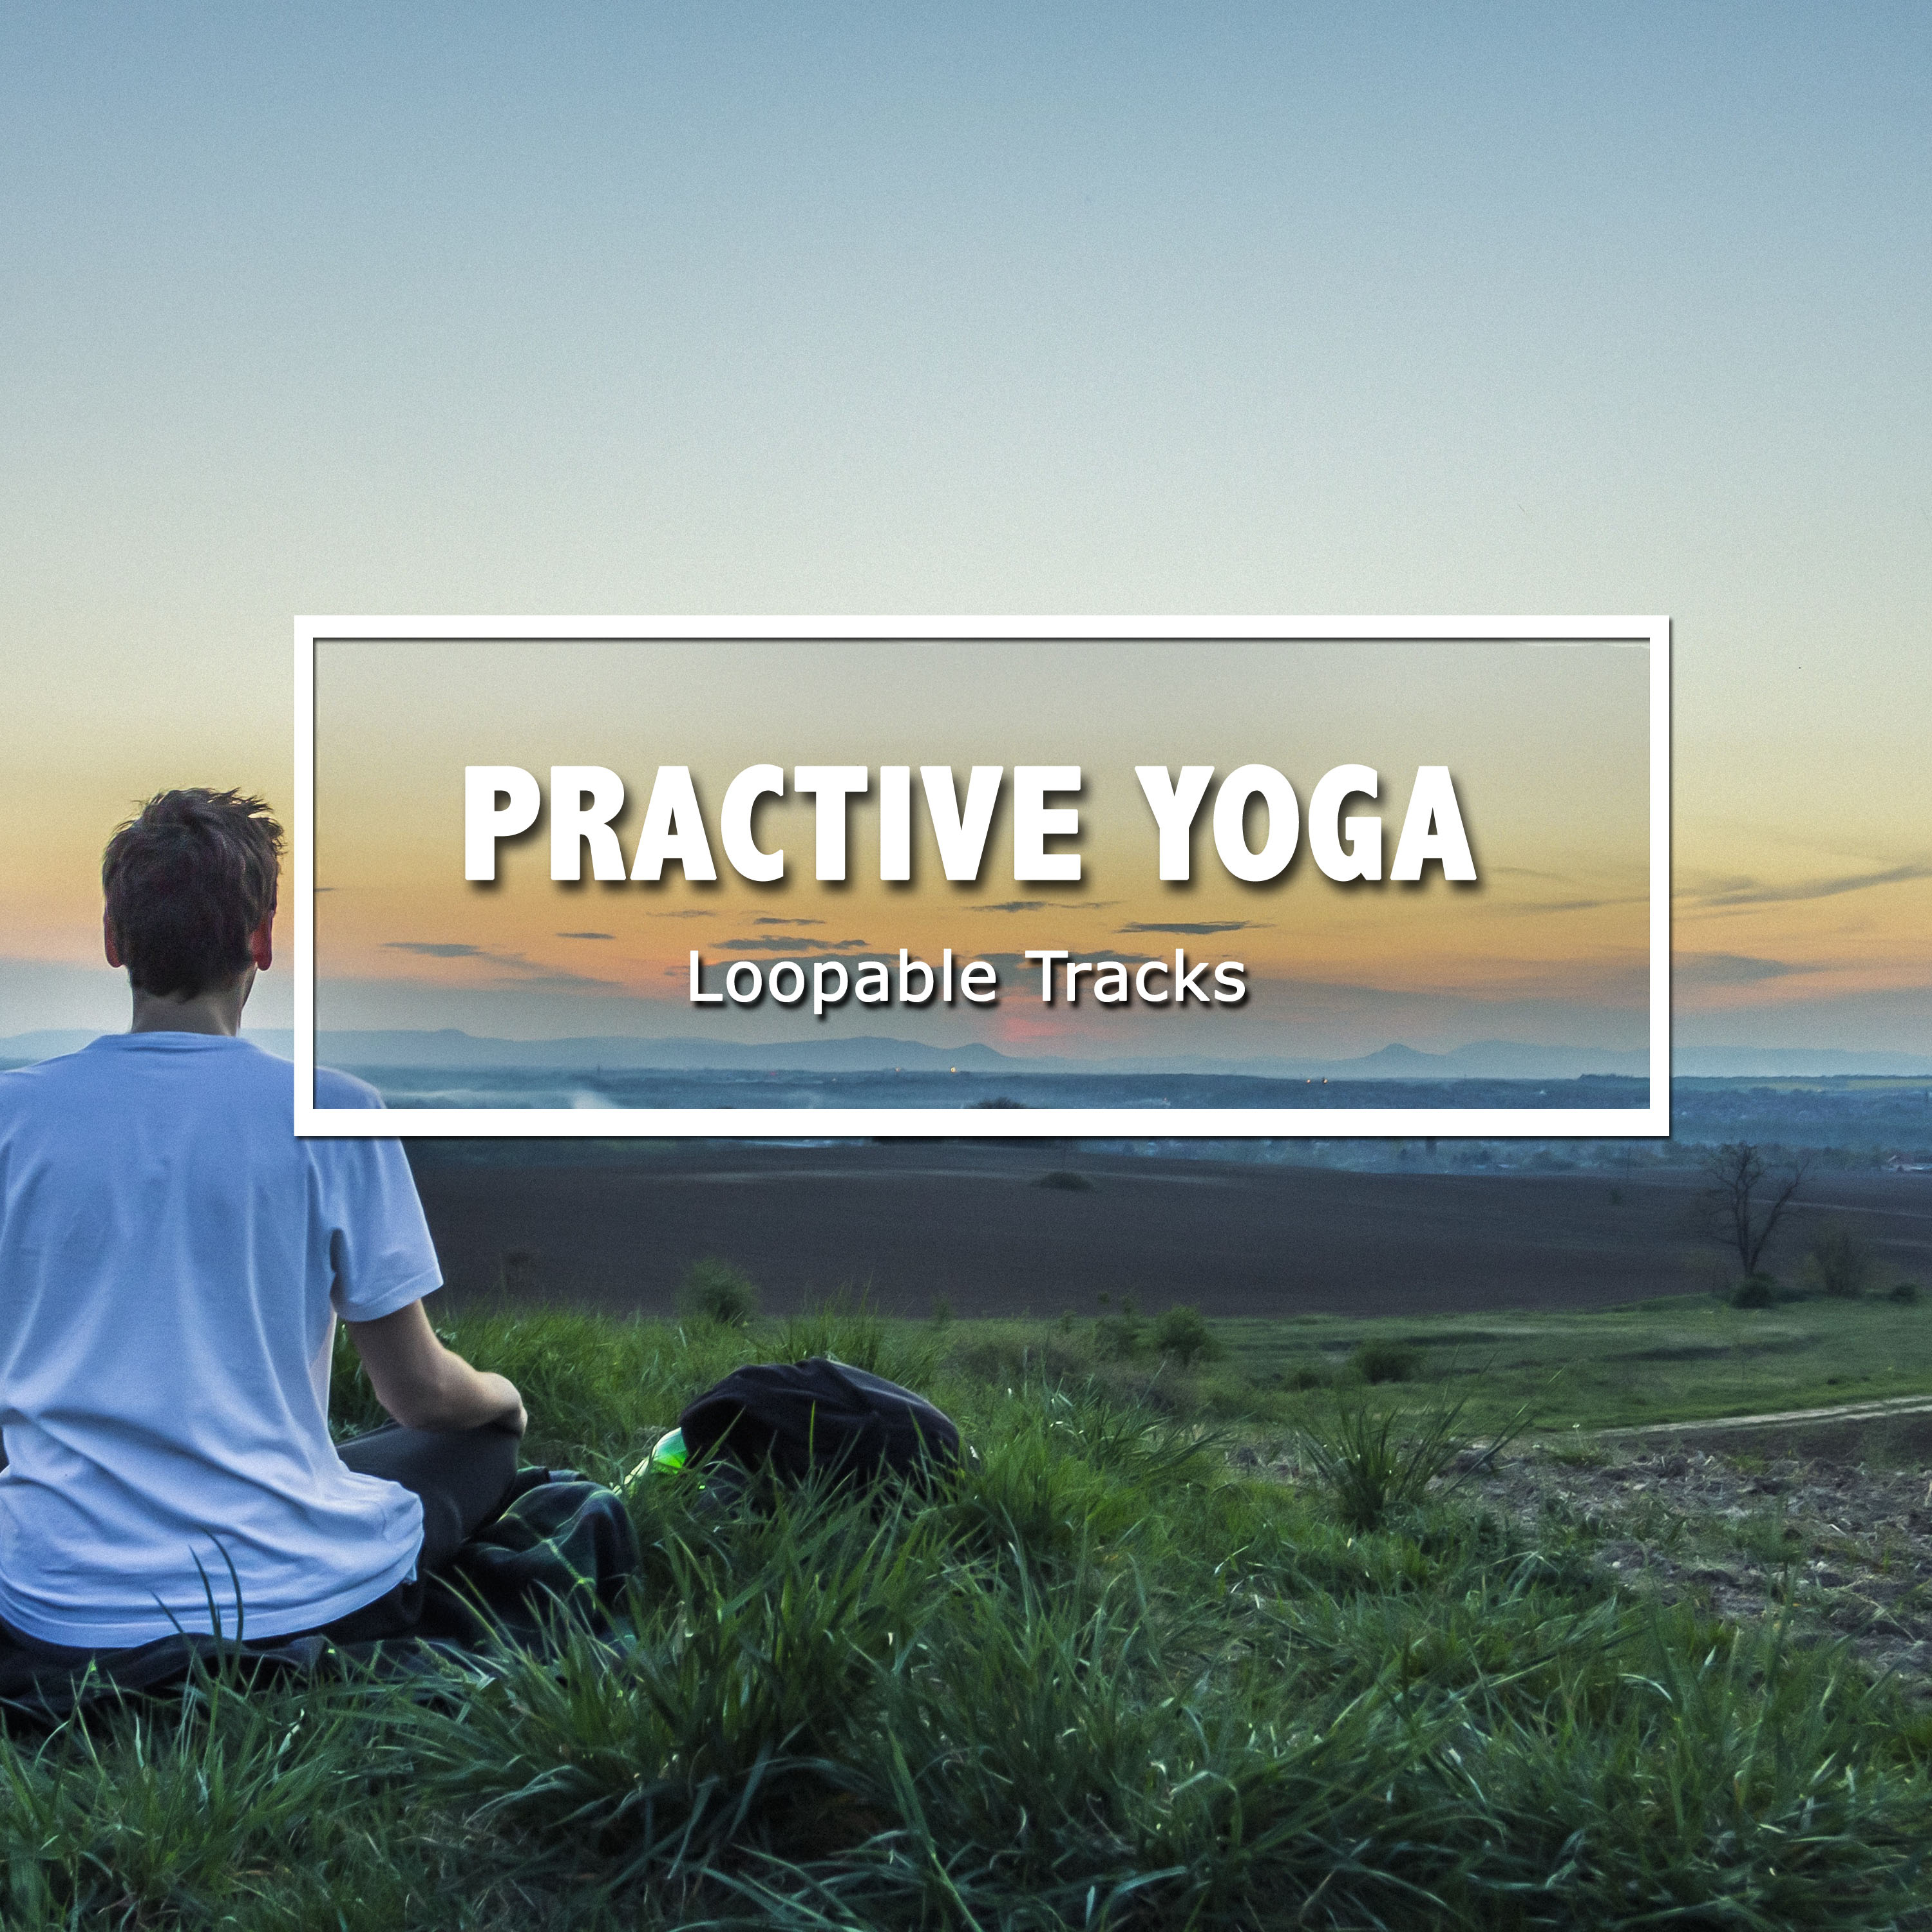 10 Loopable Tracks to Practice Yoga and Massage